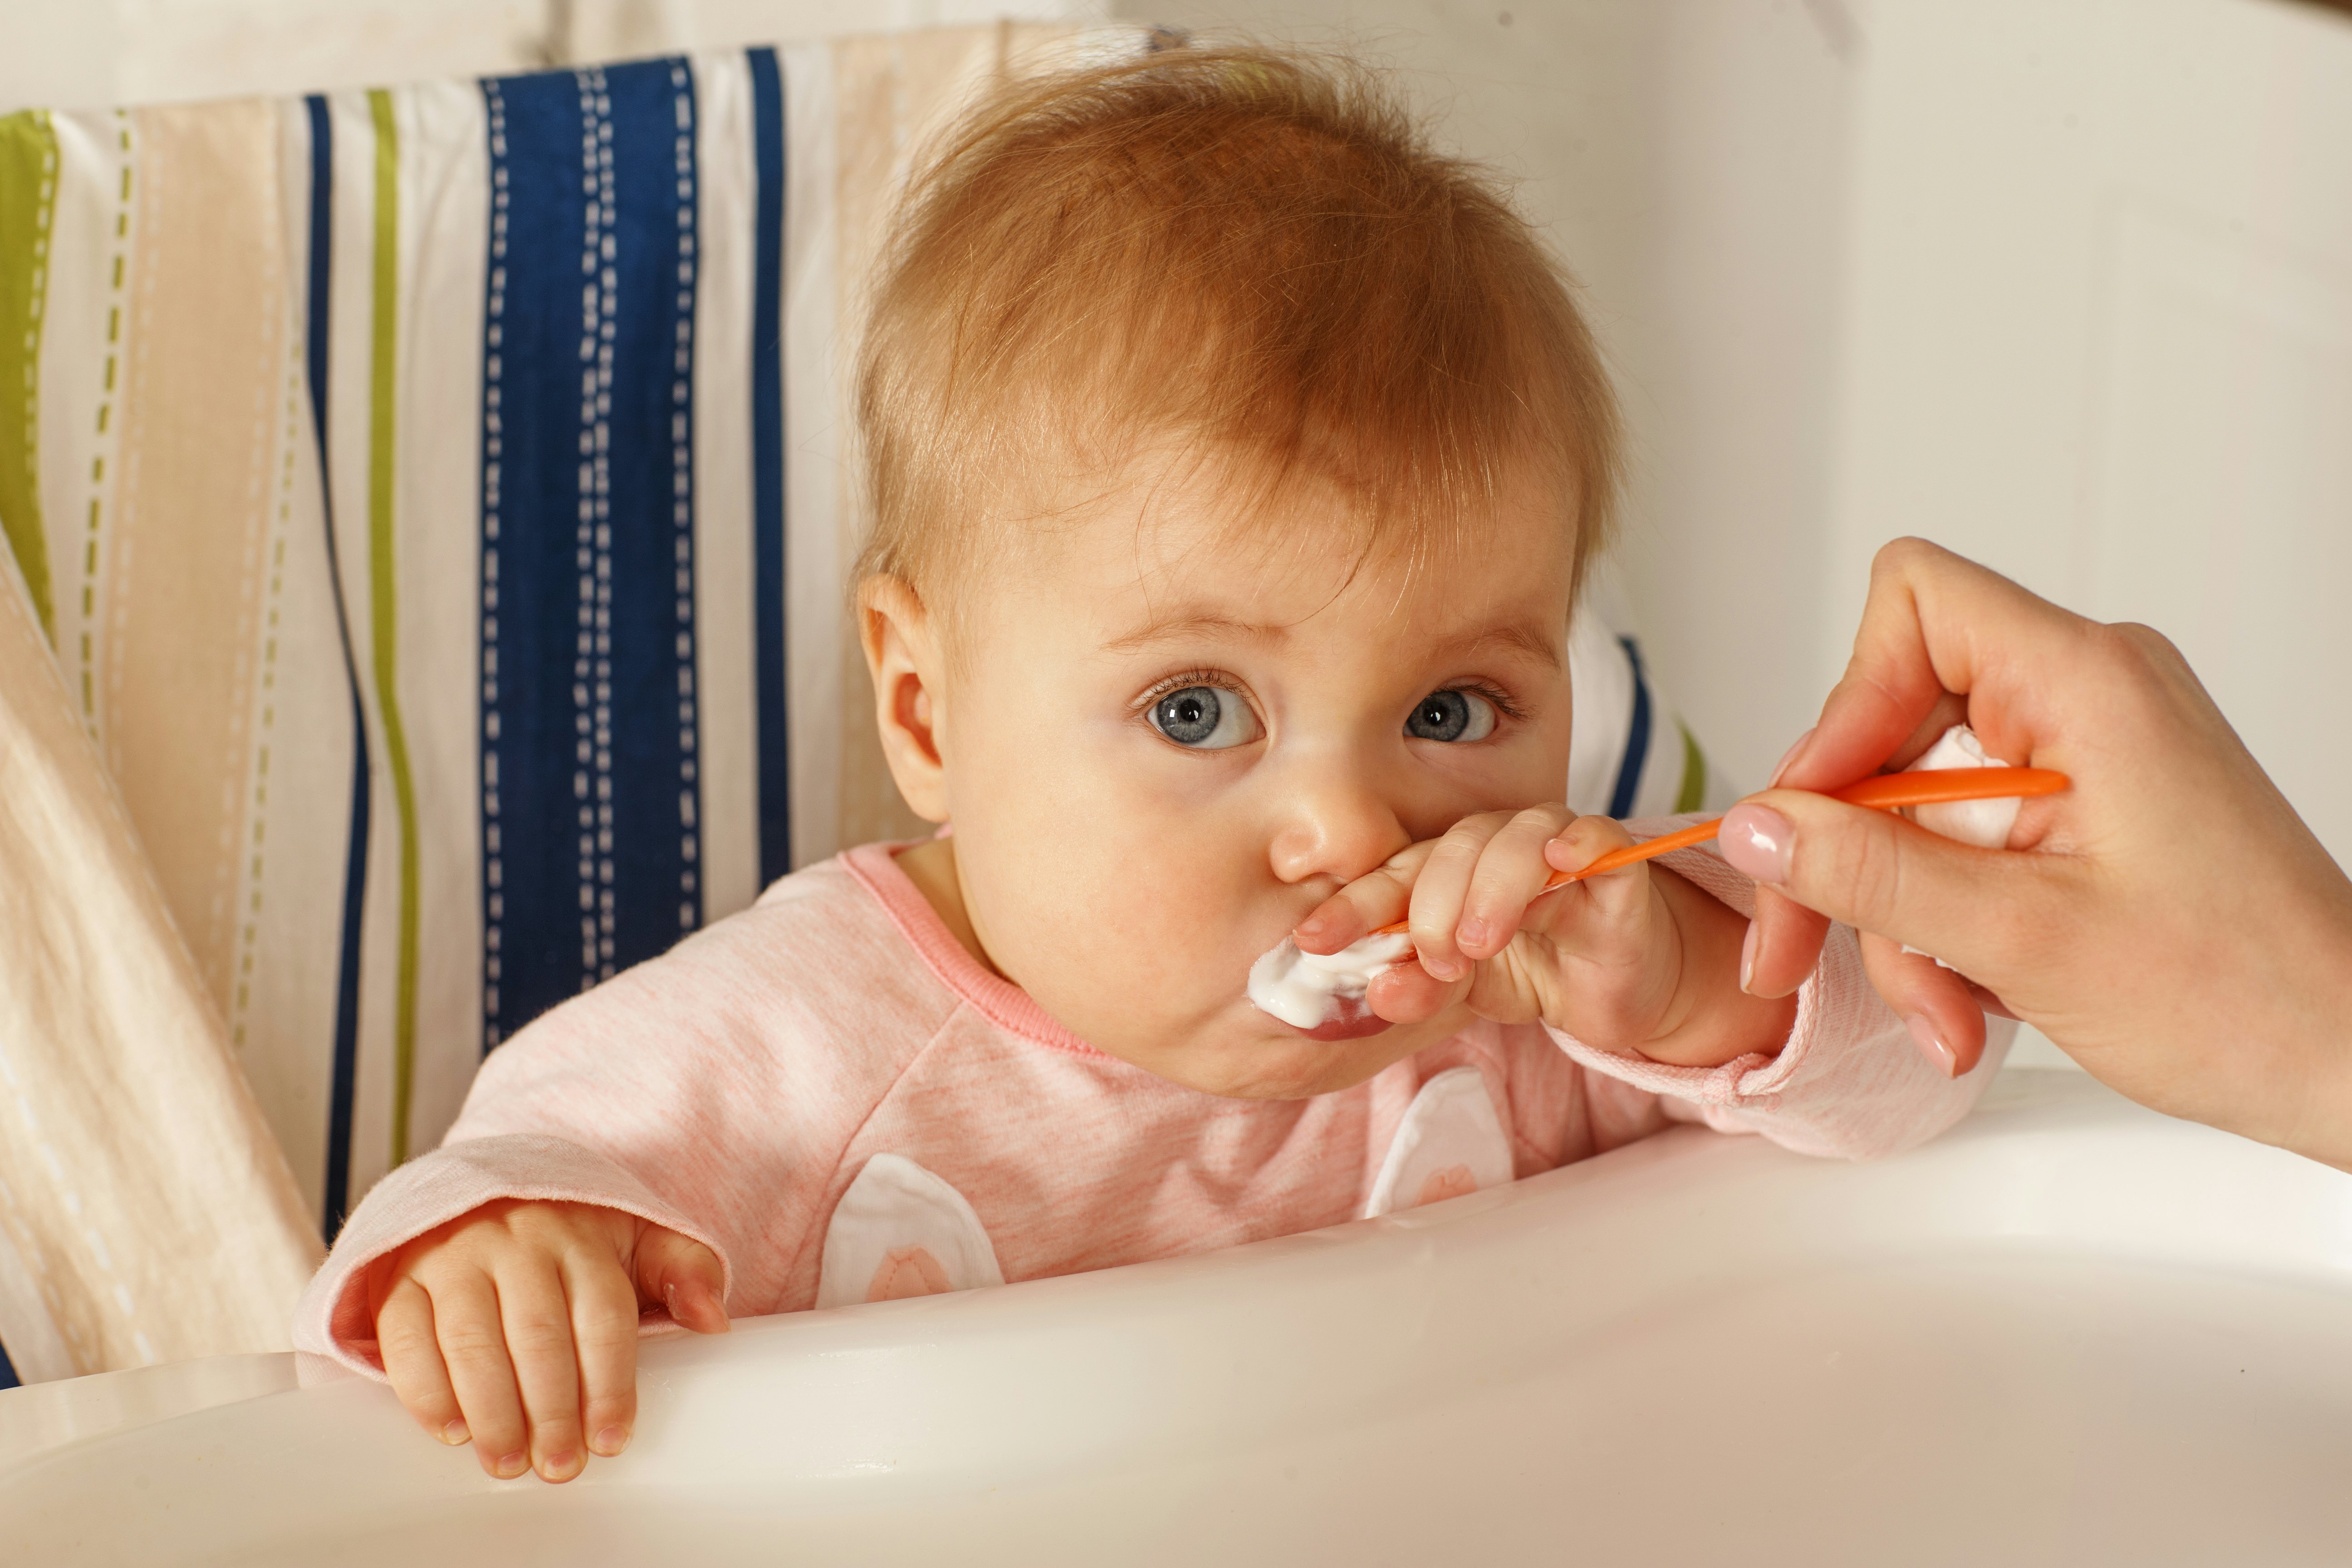 When Do You Teach Your Baby To Use A Spoon Sooner Than You Think